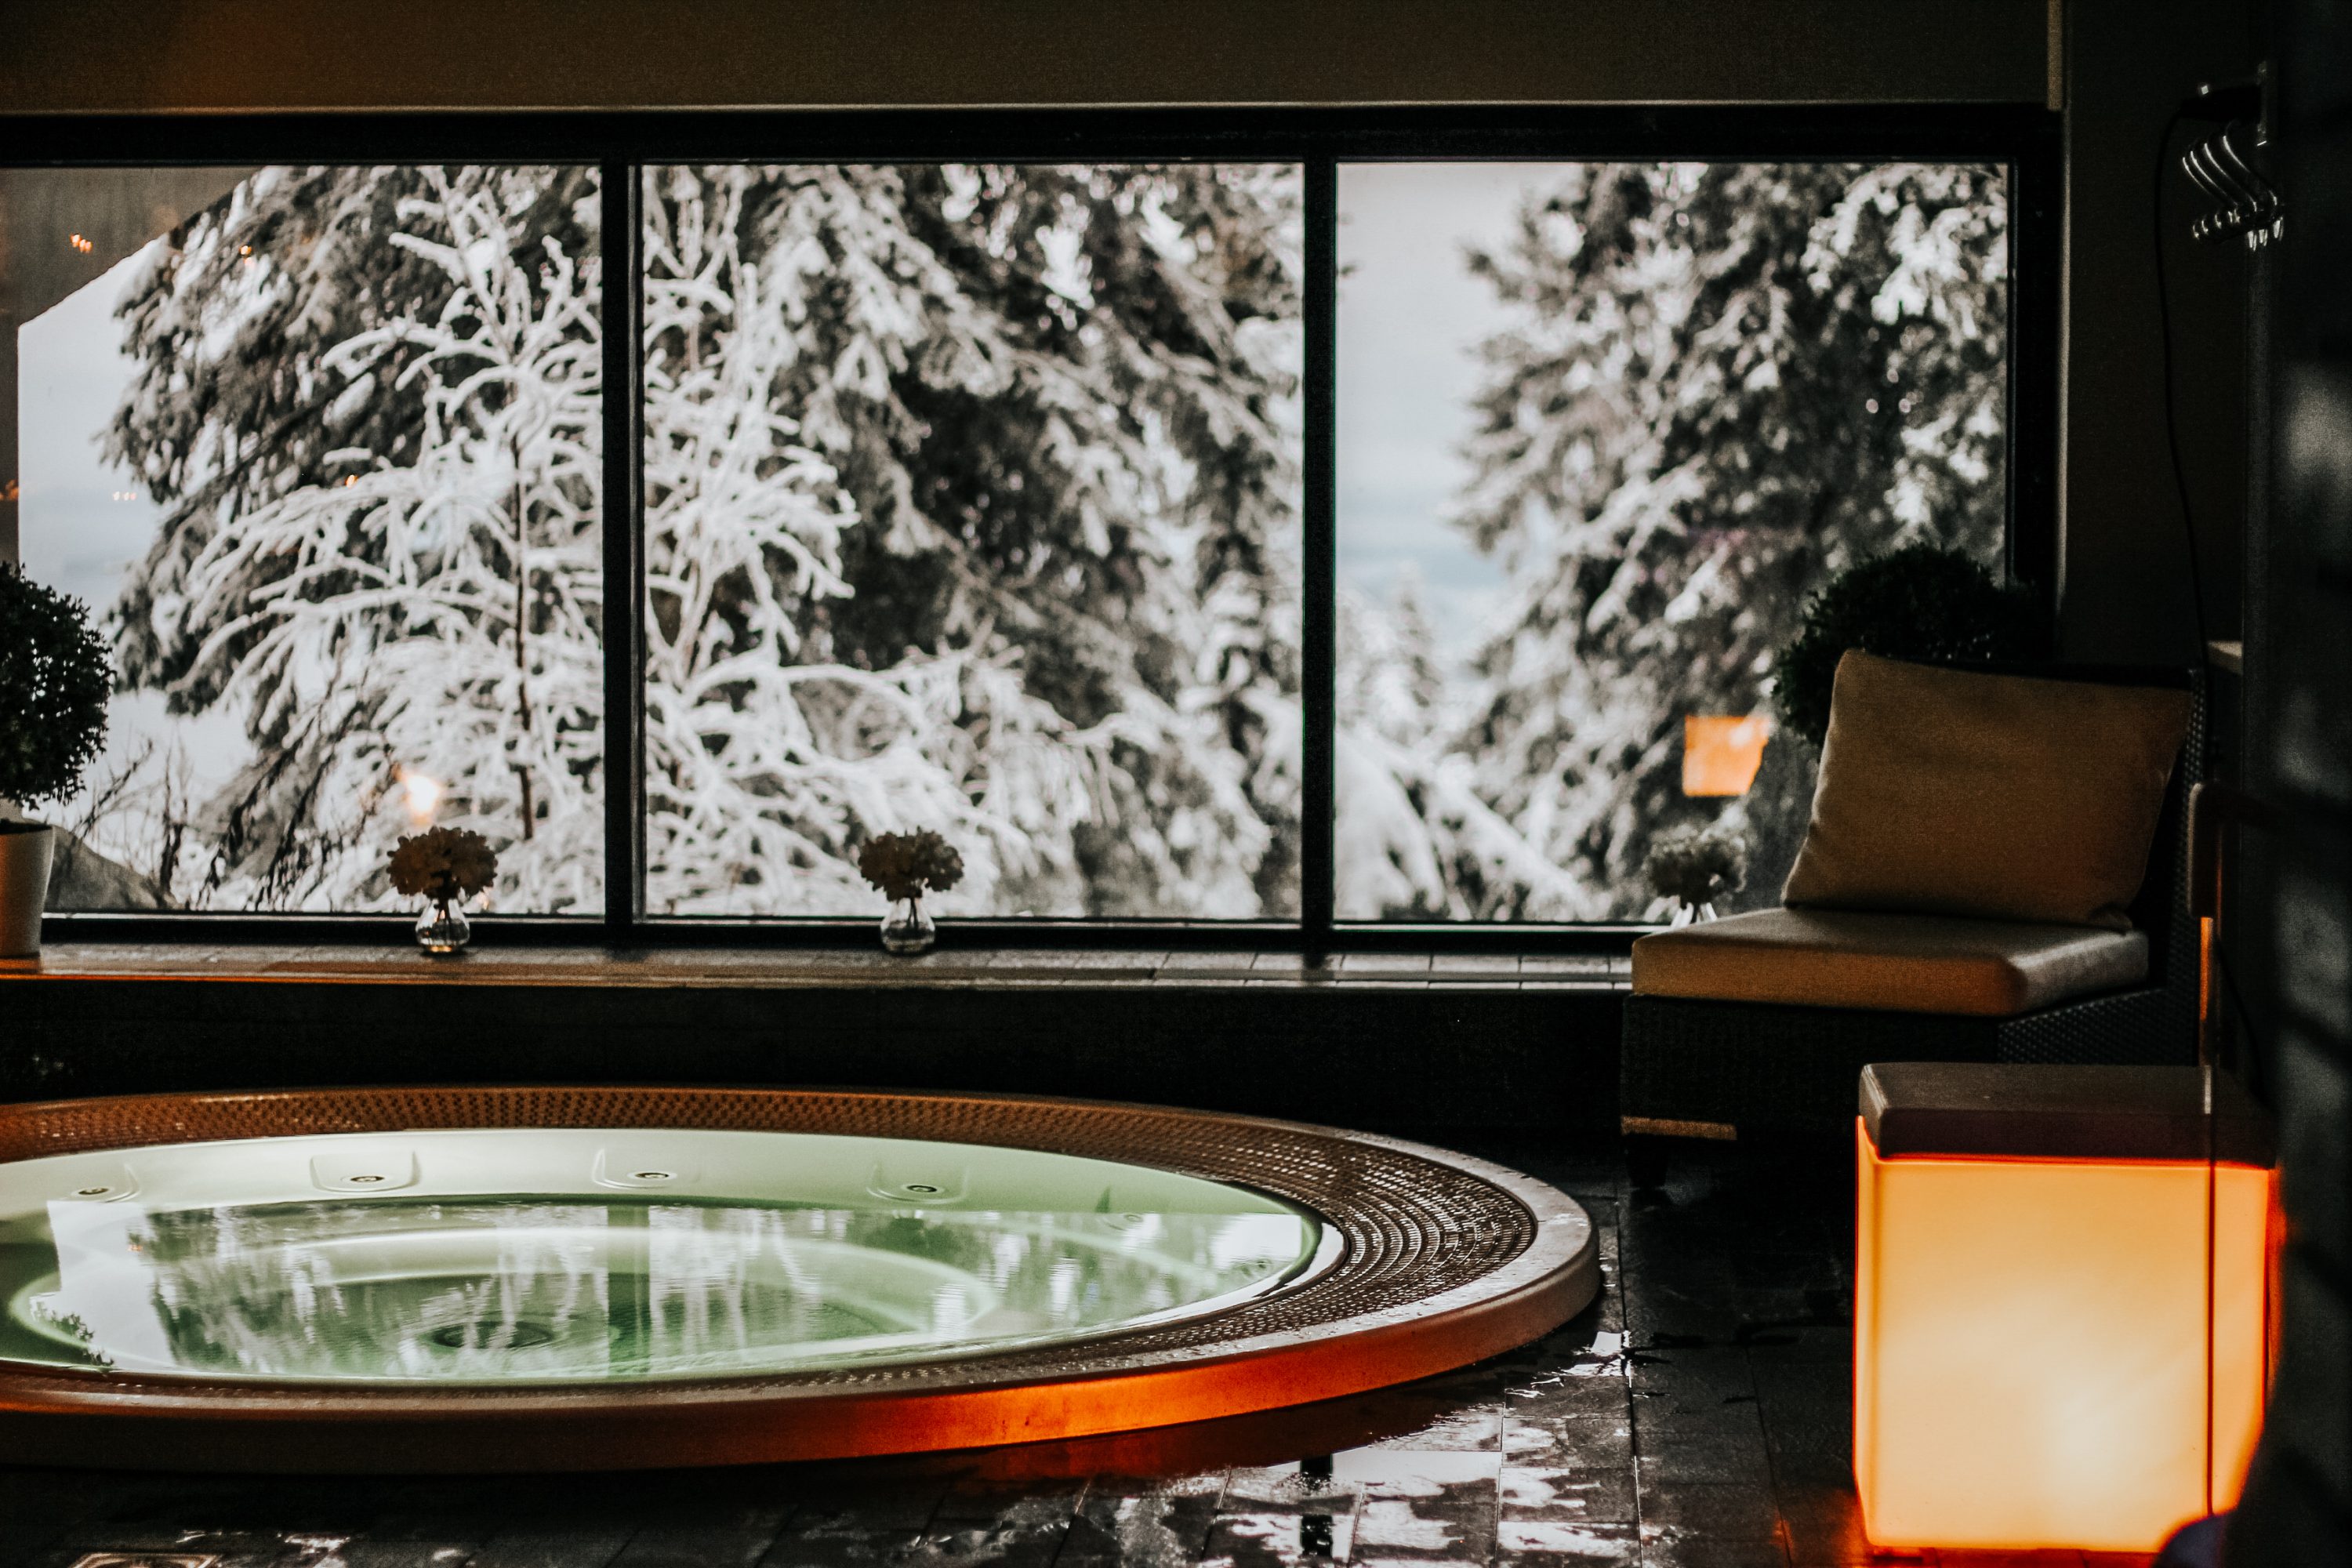 A hot pool with a snowy view